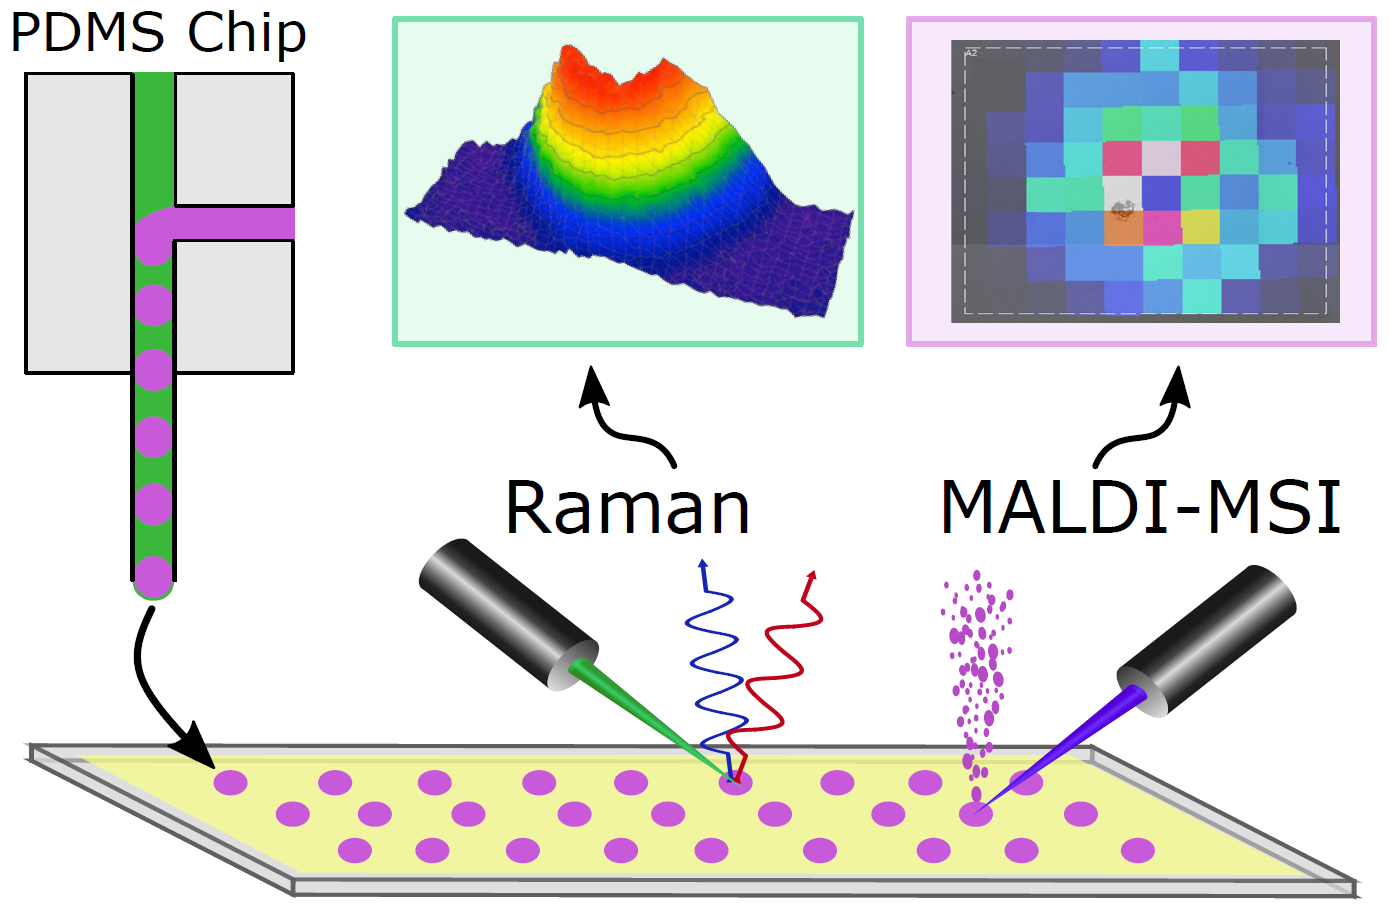 Abstract image from "Droplet Microfluidics with MALDI-MS Detection: The Effects of Oil Phases in GABA Analysis" in ACS Measurement Science Au in August 2021. https://pubs.acs.org/doi/full/10.1021/acsmeasuresciau.1c00017